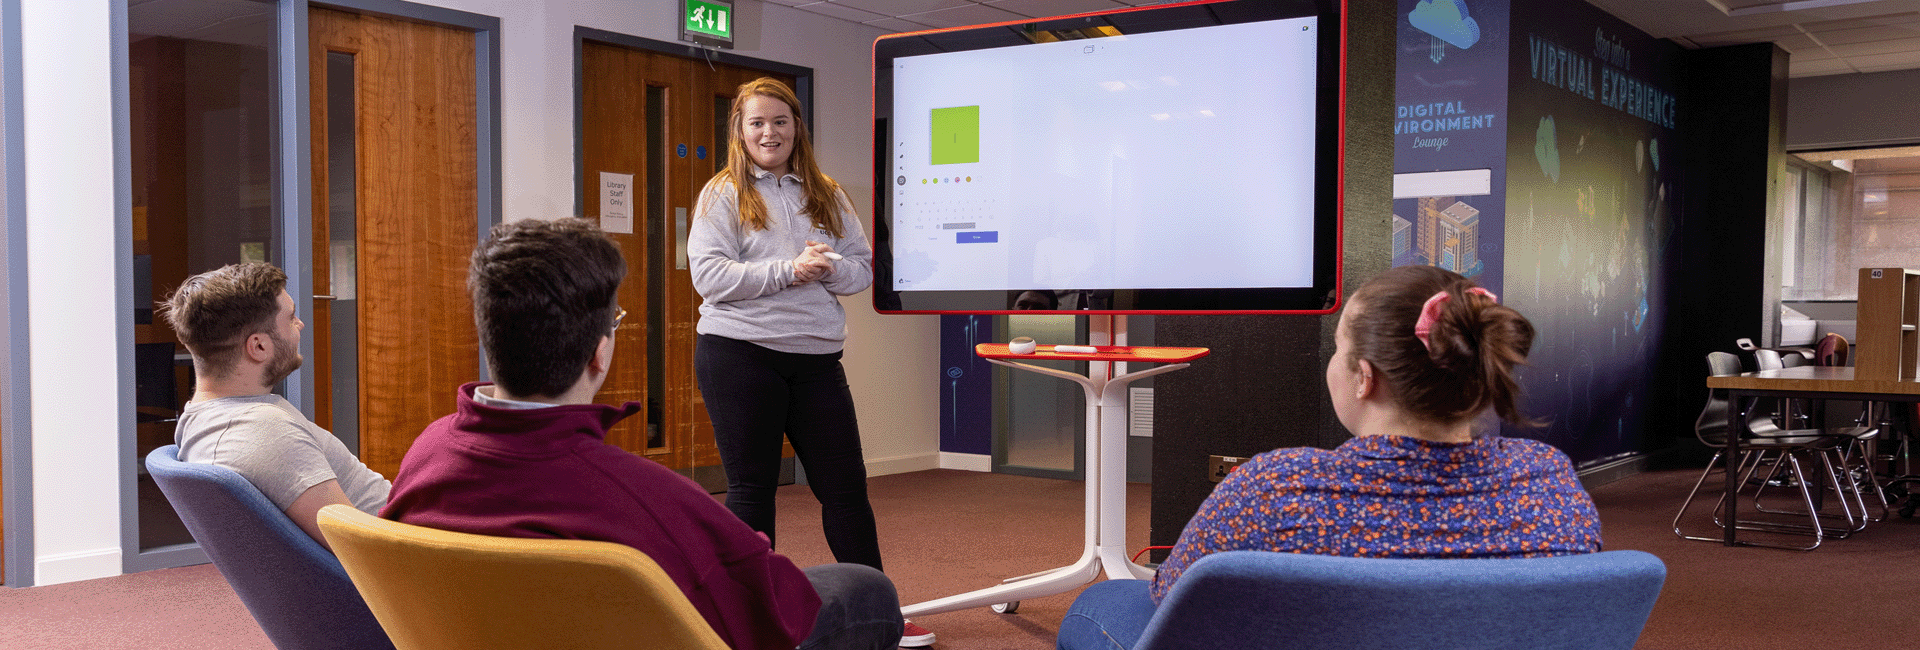 A young woman standing beside a large screen speaking to three young people sitting in front of her